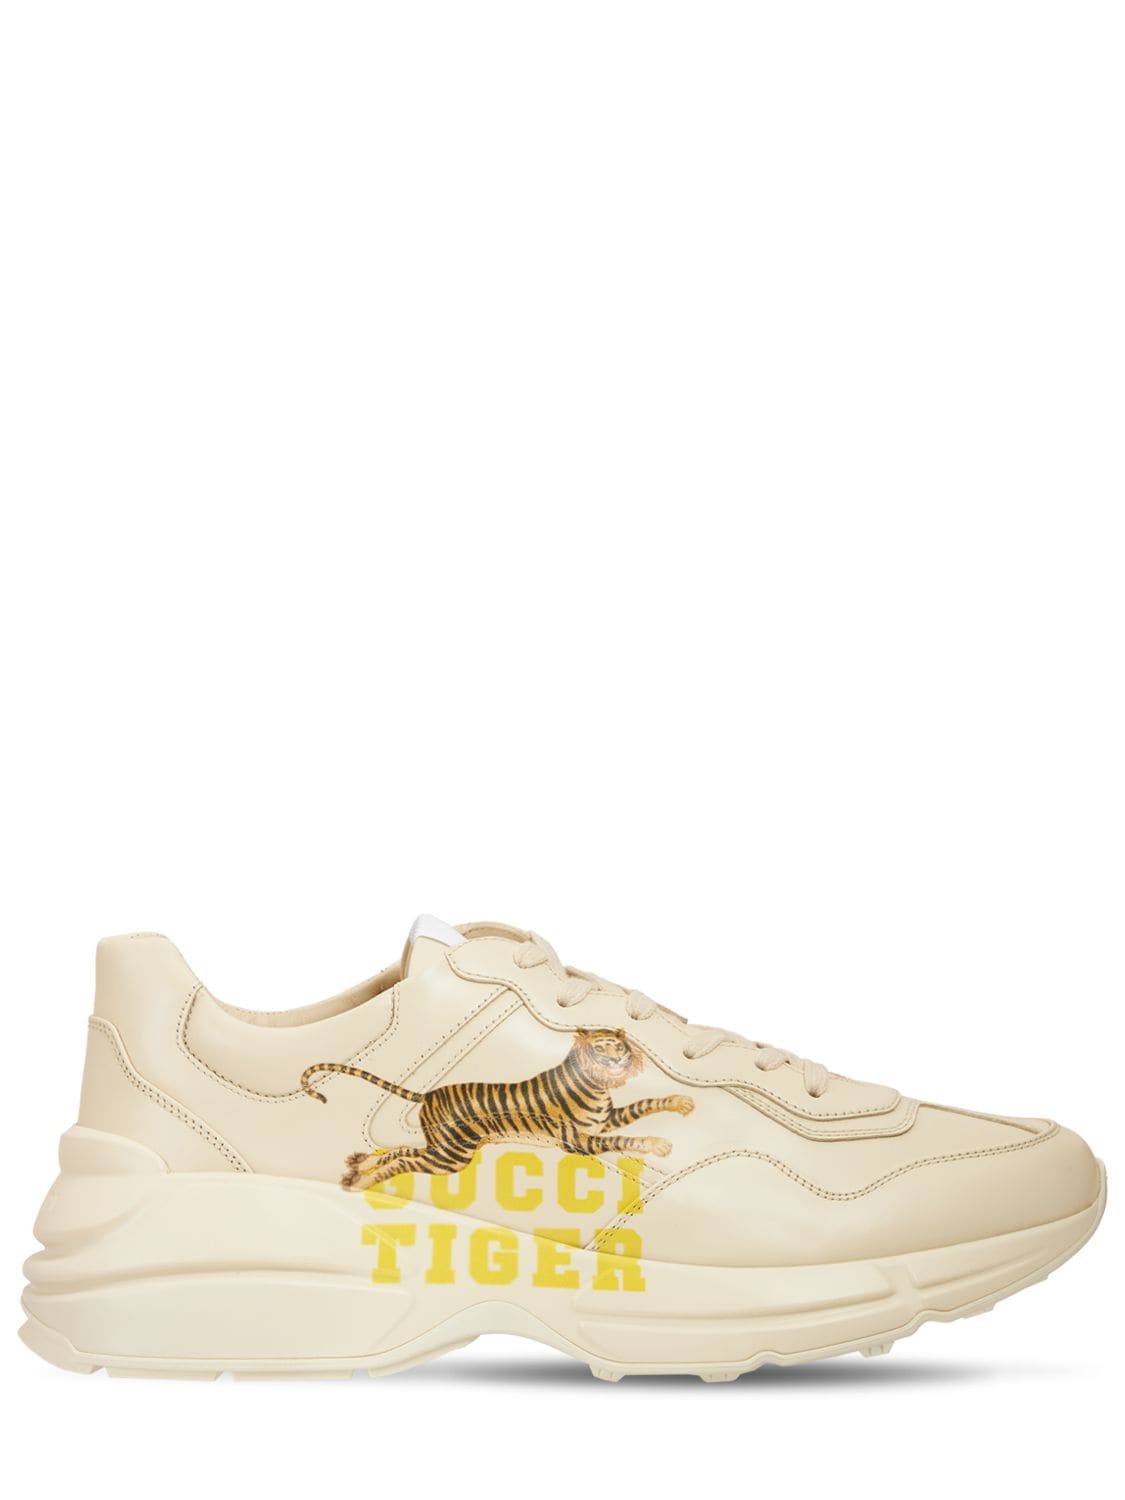 Gucci Tiger Rhyton Leather Sneakers